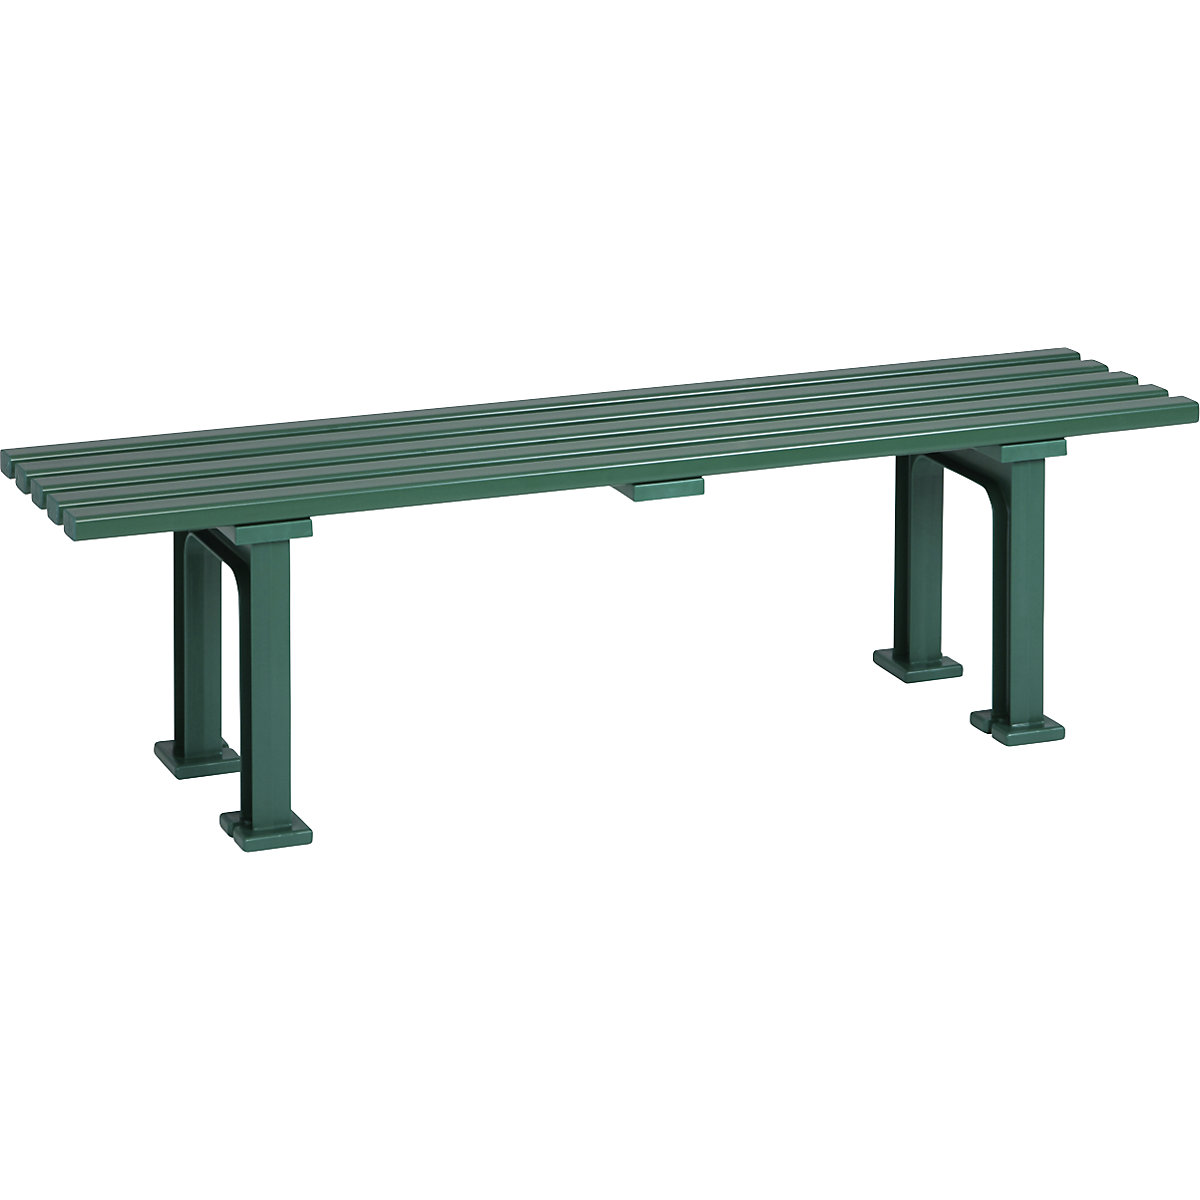 Seating bench without backrest, with 5 slats, length 1500 mm, green-8